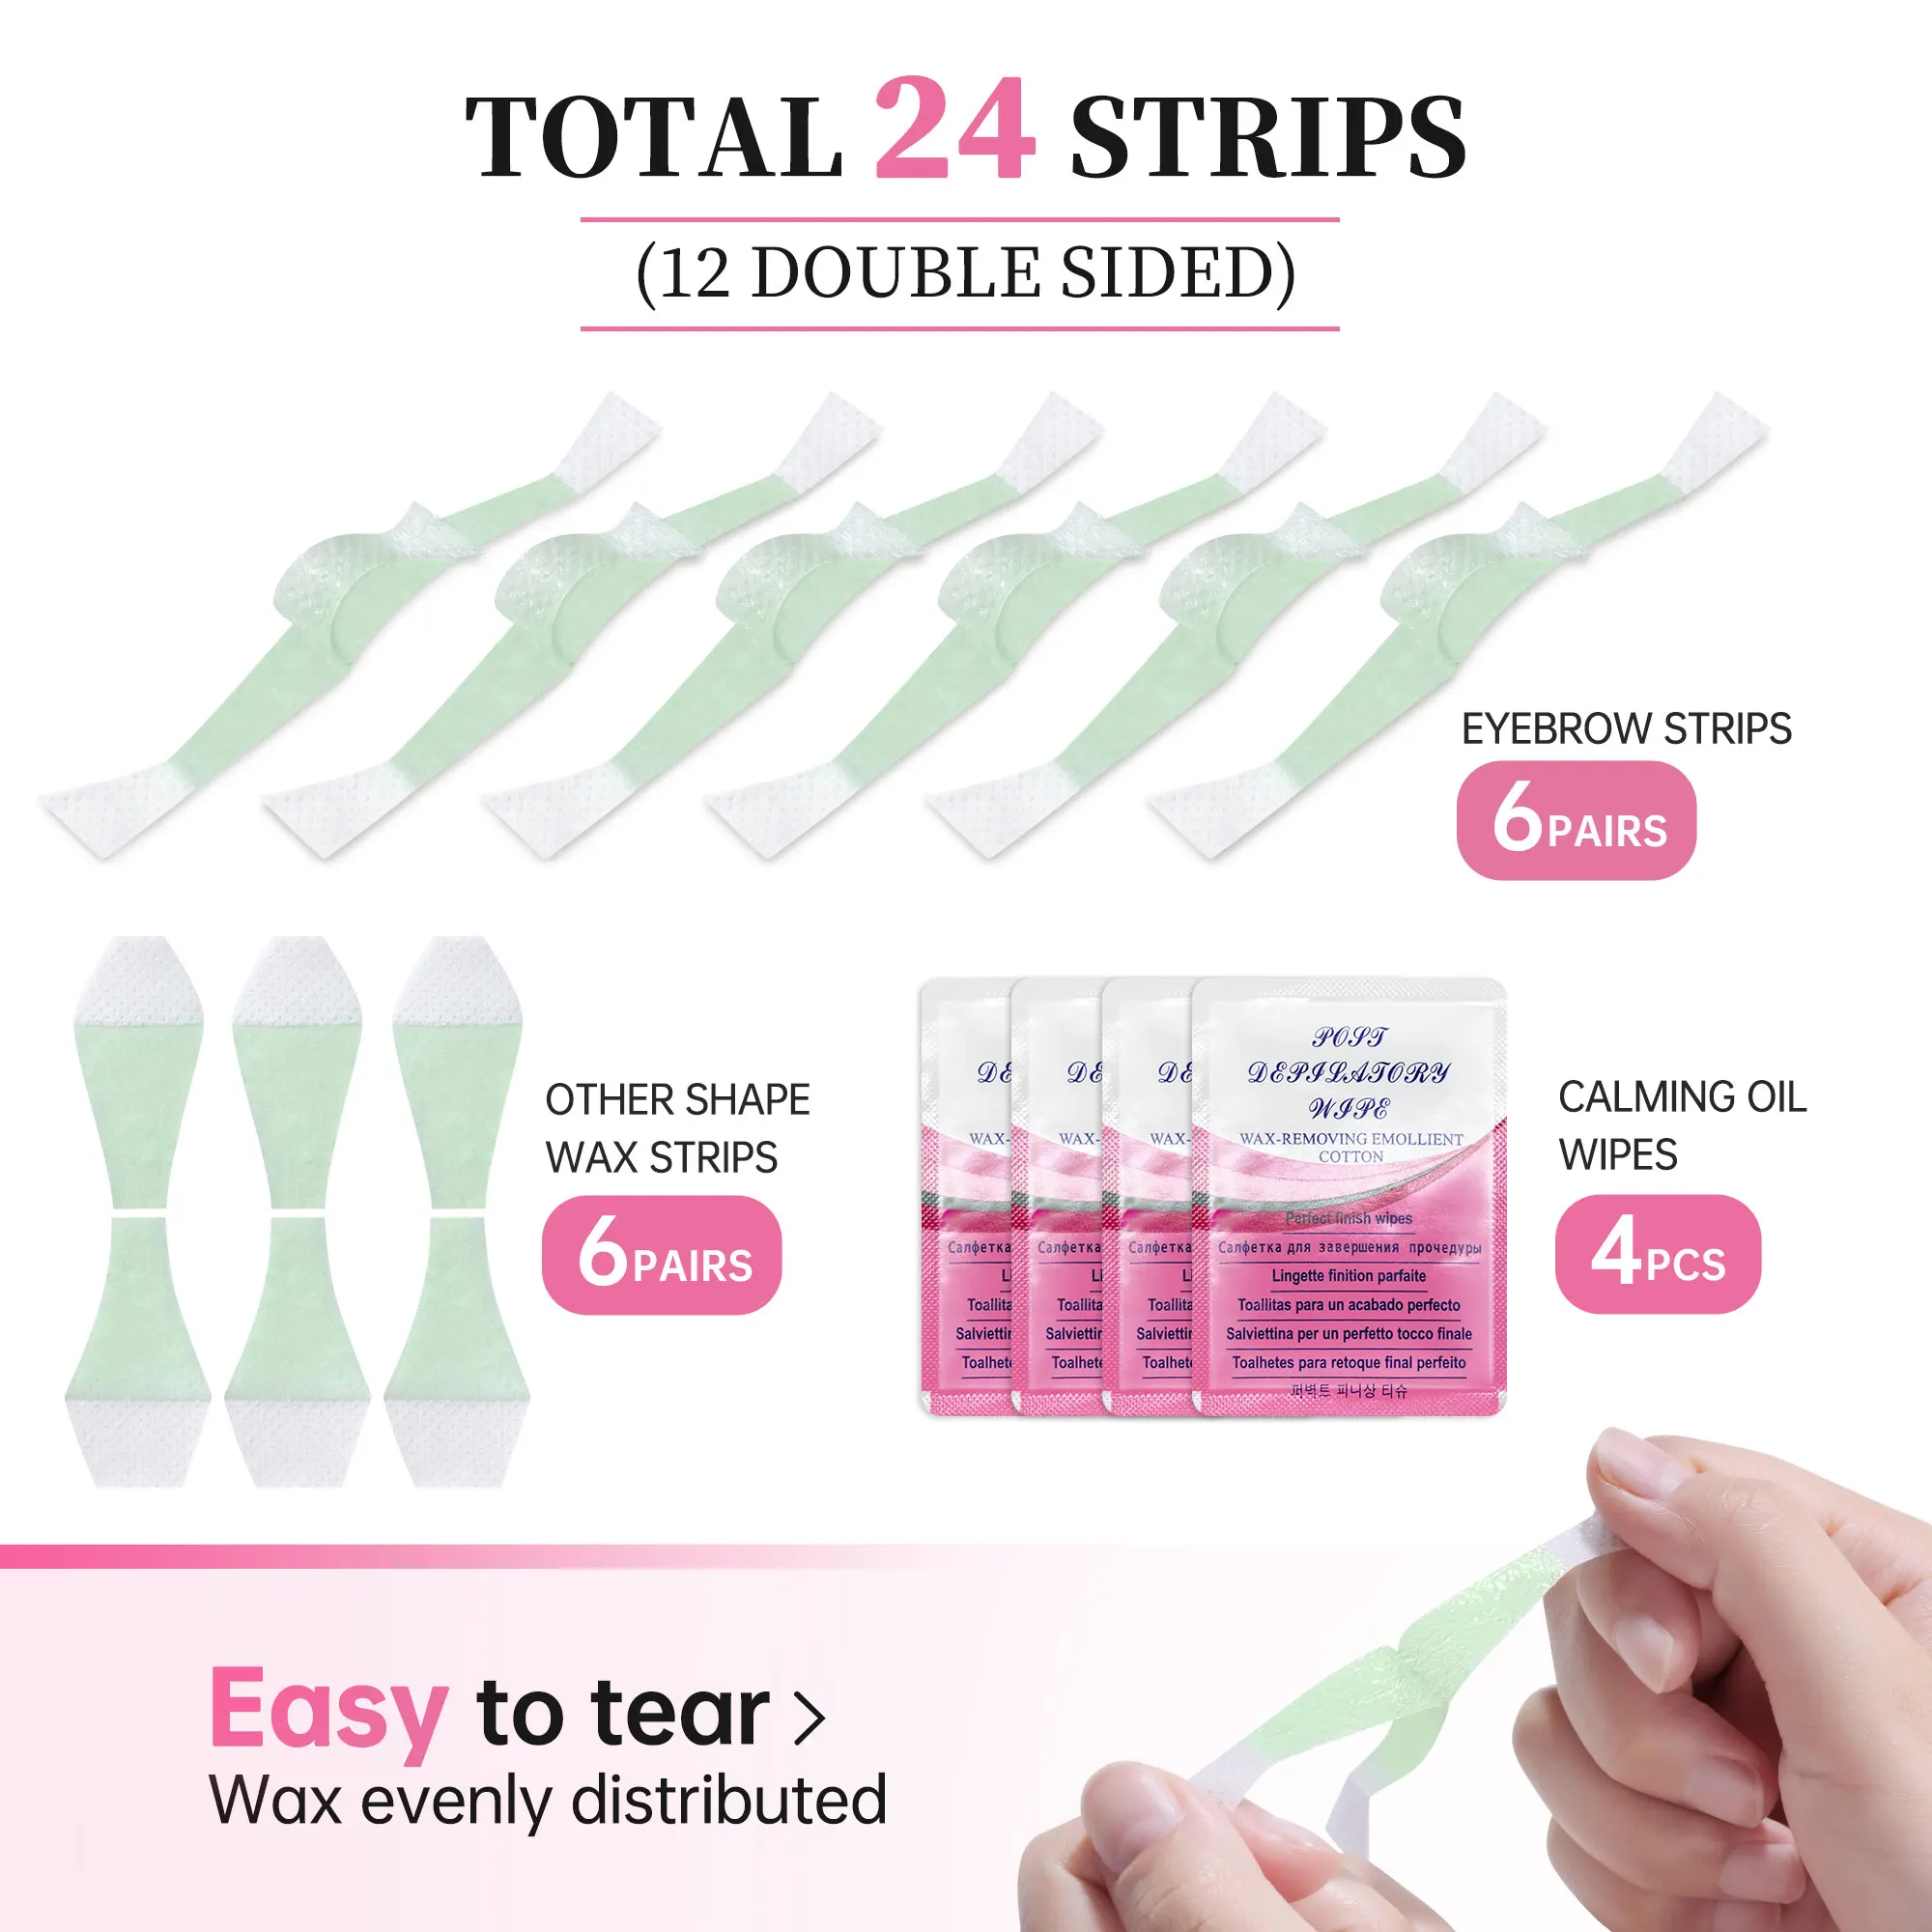 Beauty7 Eyebrow Wax Strips Kit Facial Wax Strips Hair Removal Eyebrow at Home 24 Strips 4 Calming Oil Wipes for Sensitive Skin images - 6